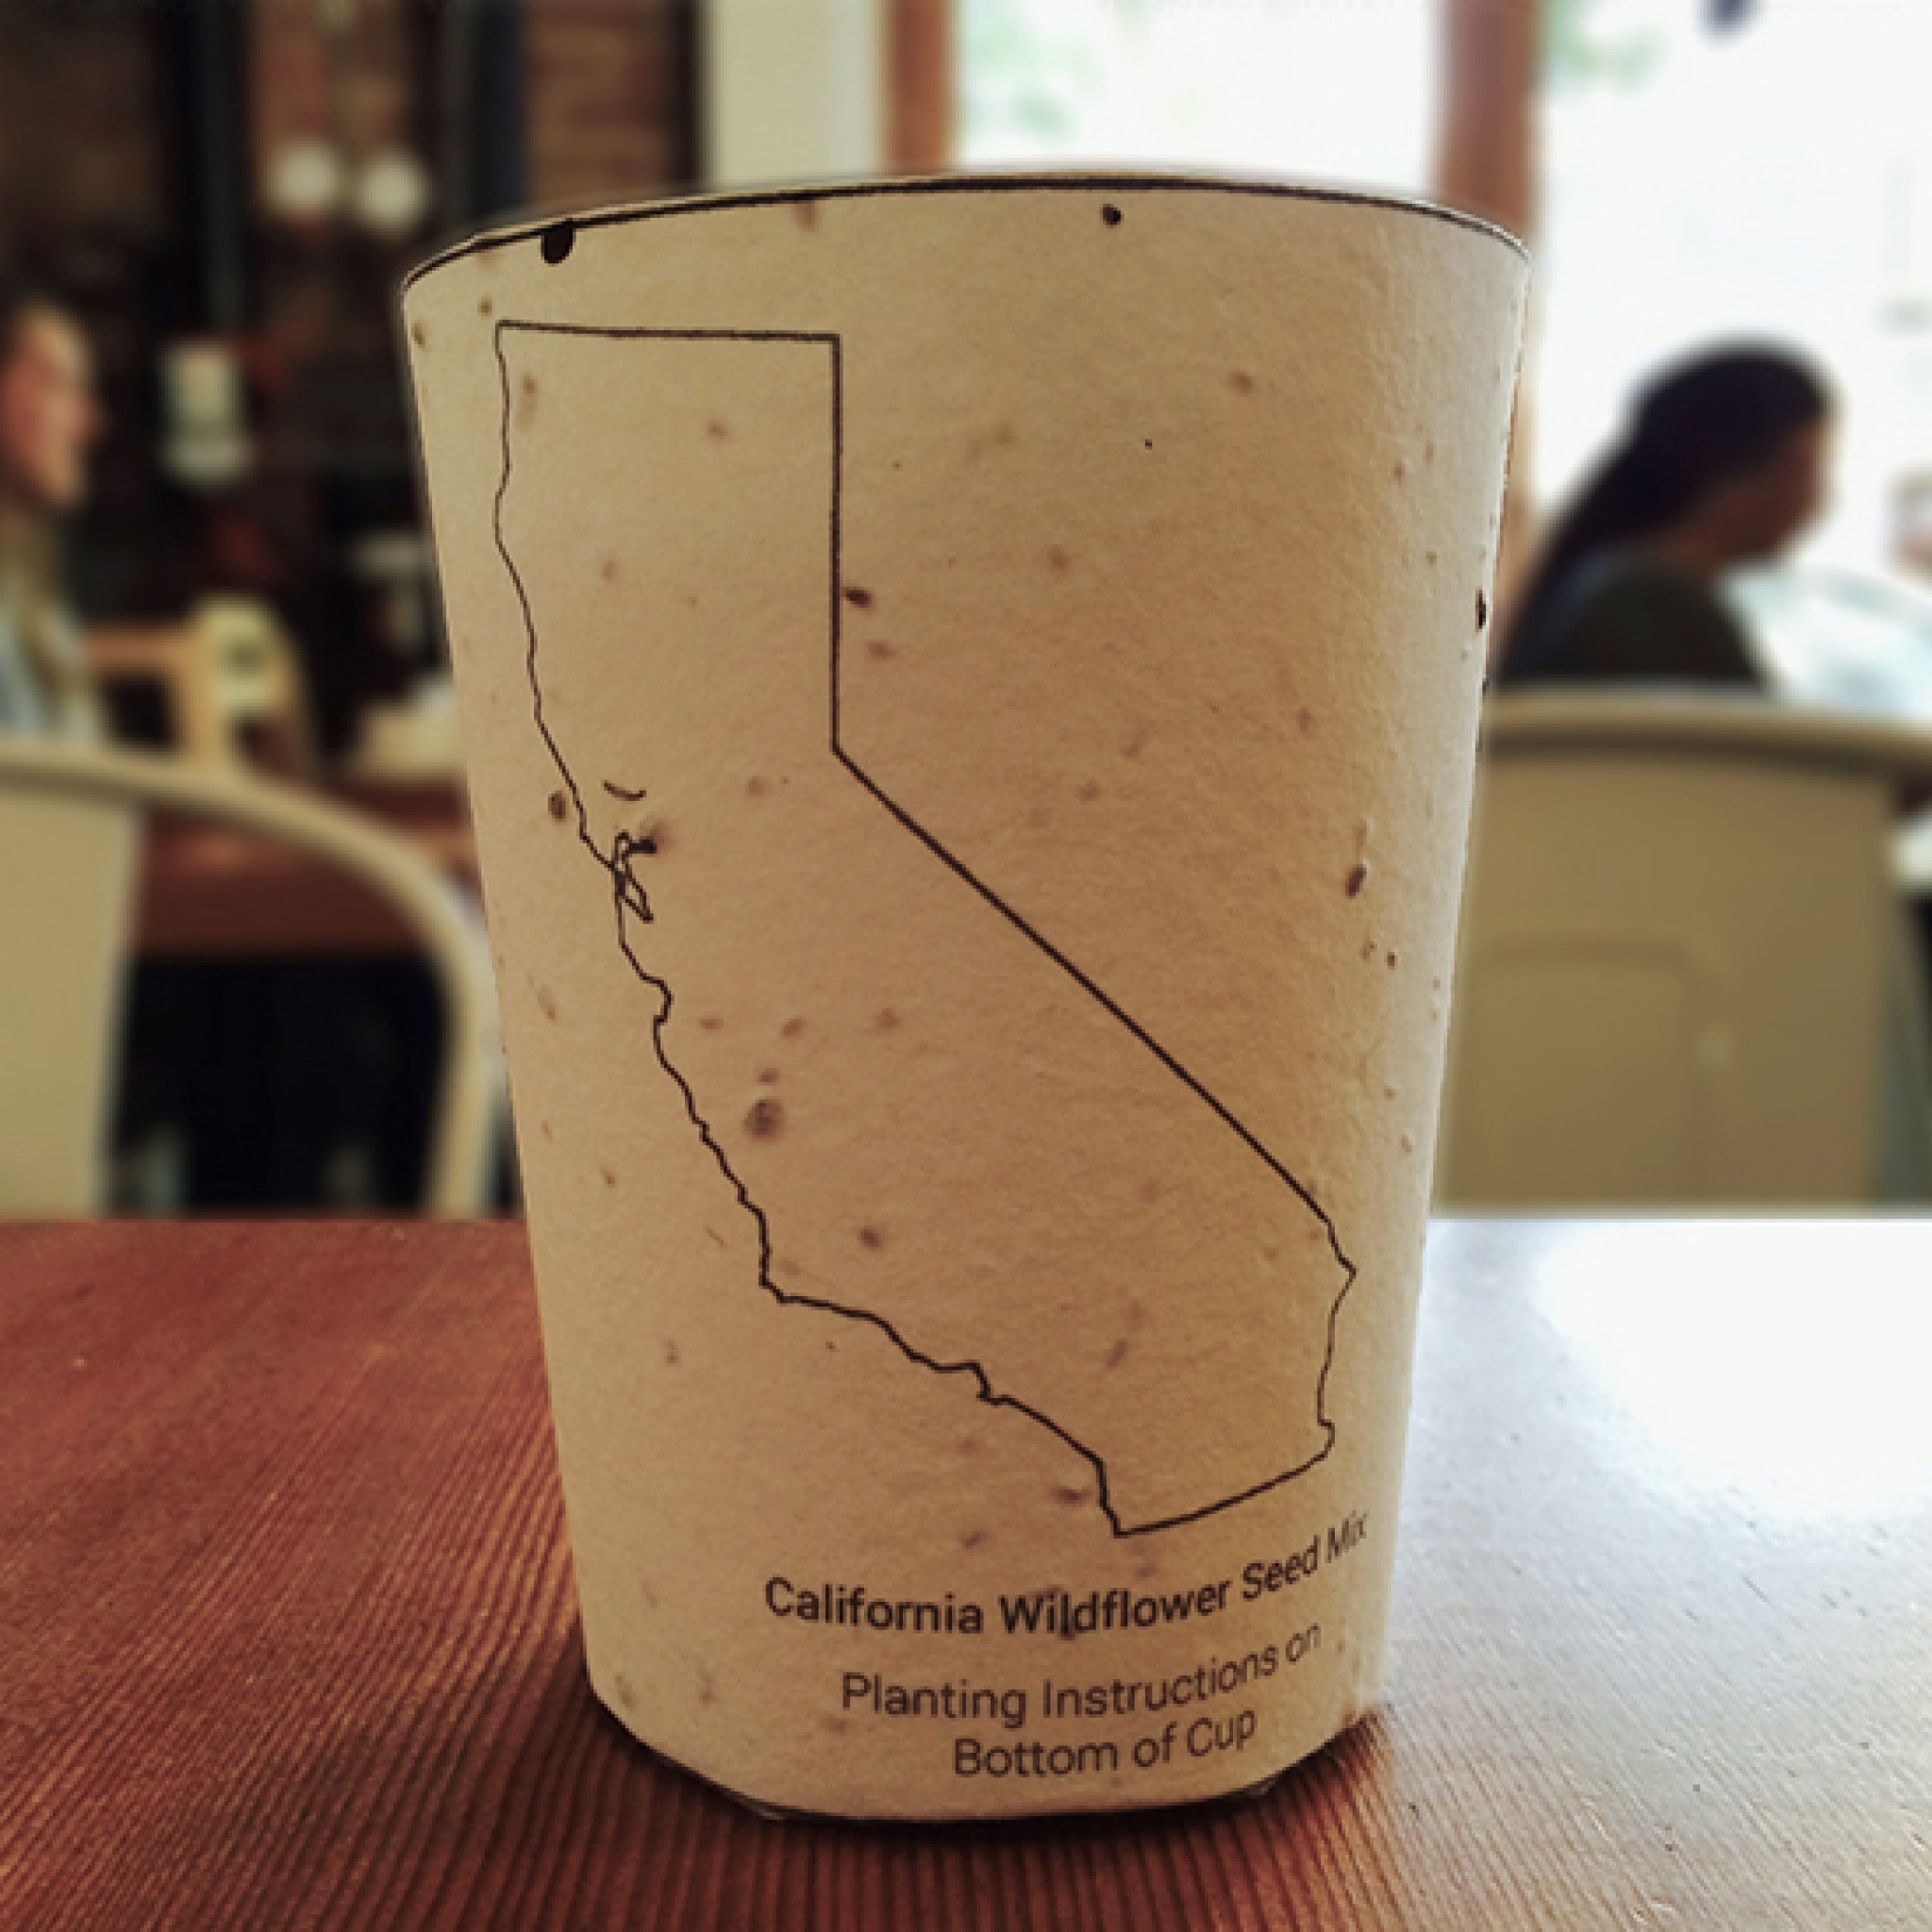 beyond-biodegradable-plantable-coffee-cups-might-be-the-future-food